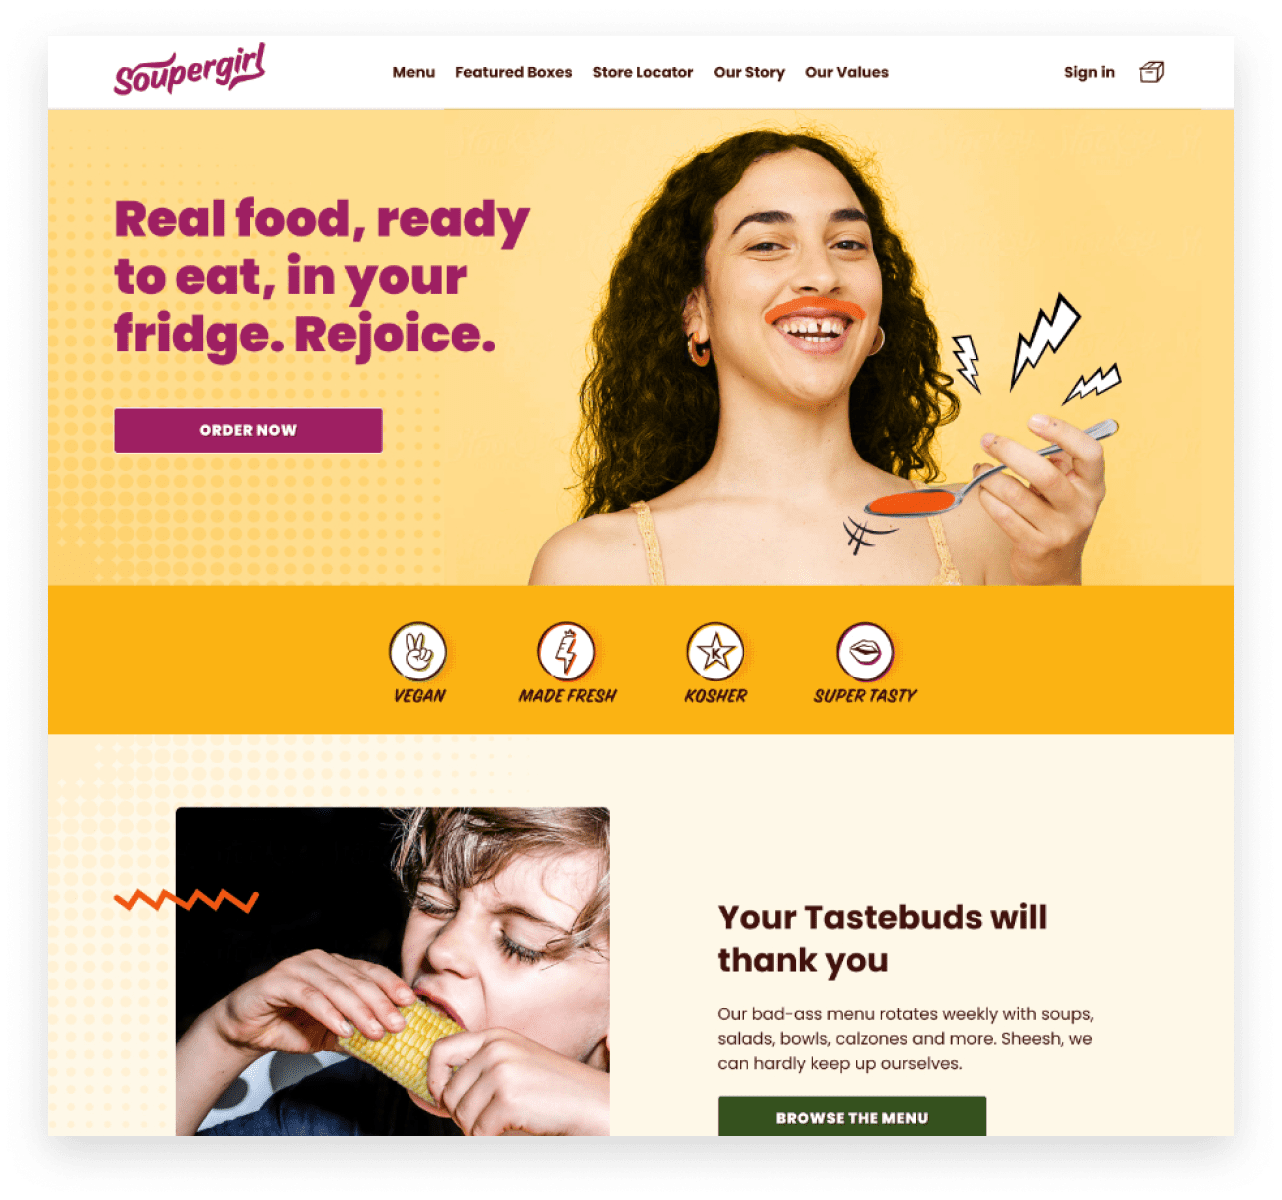 The Soupergirl homepage prominently displays their health focused messaging.